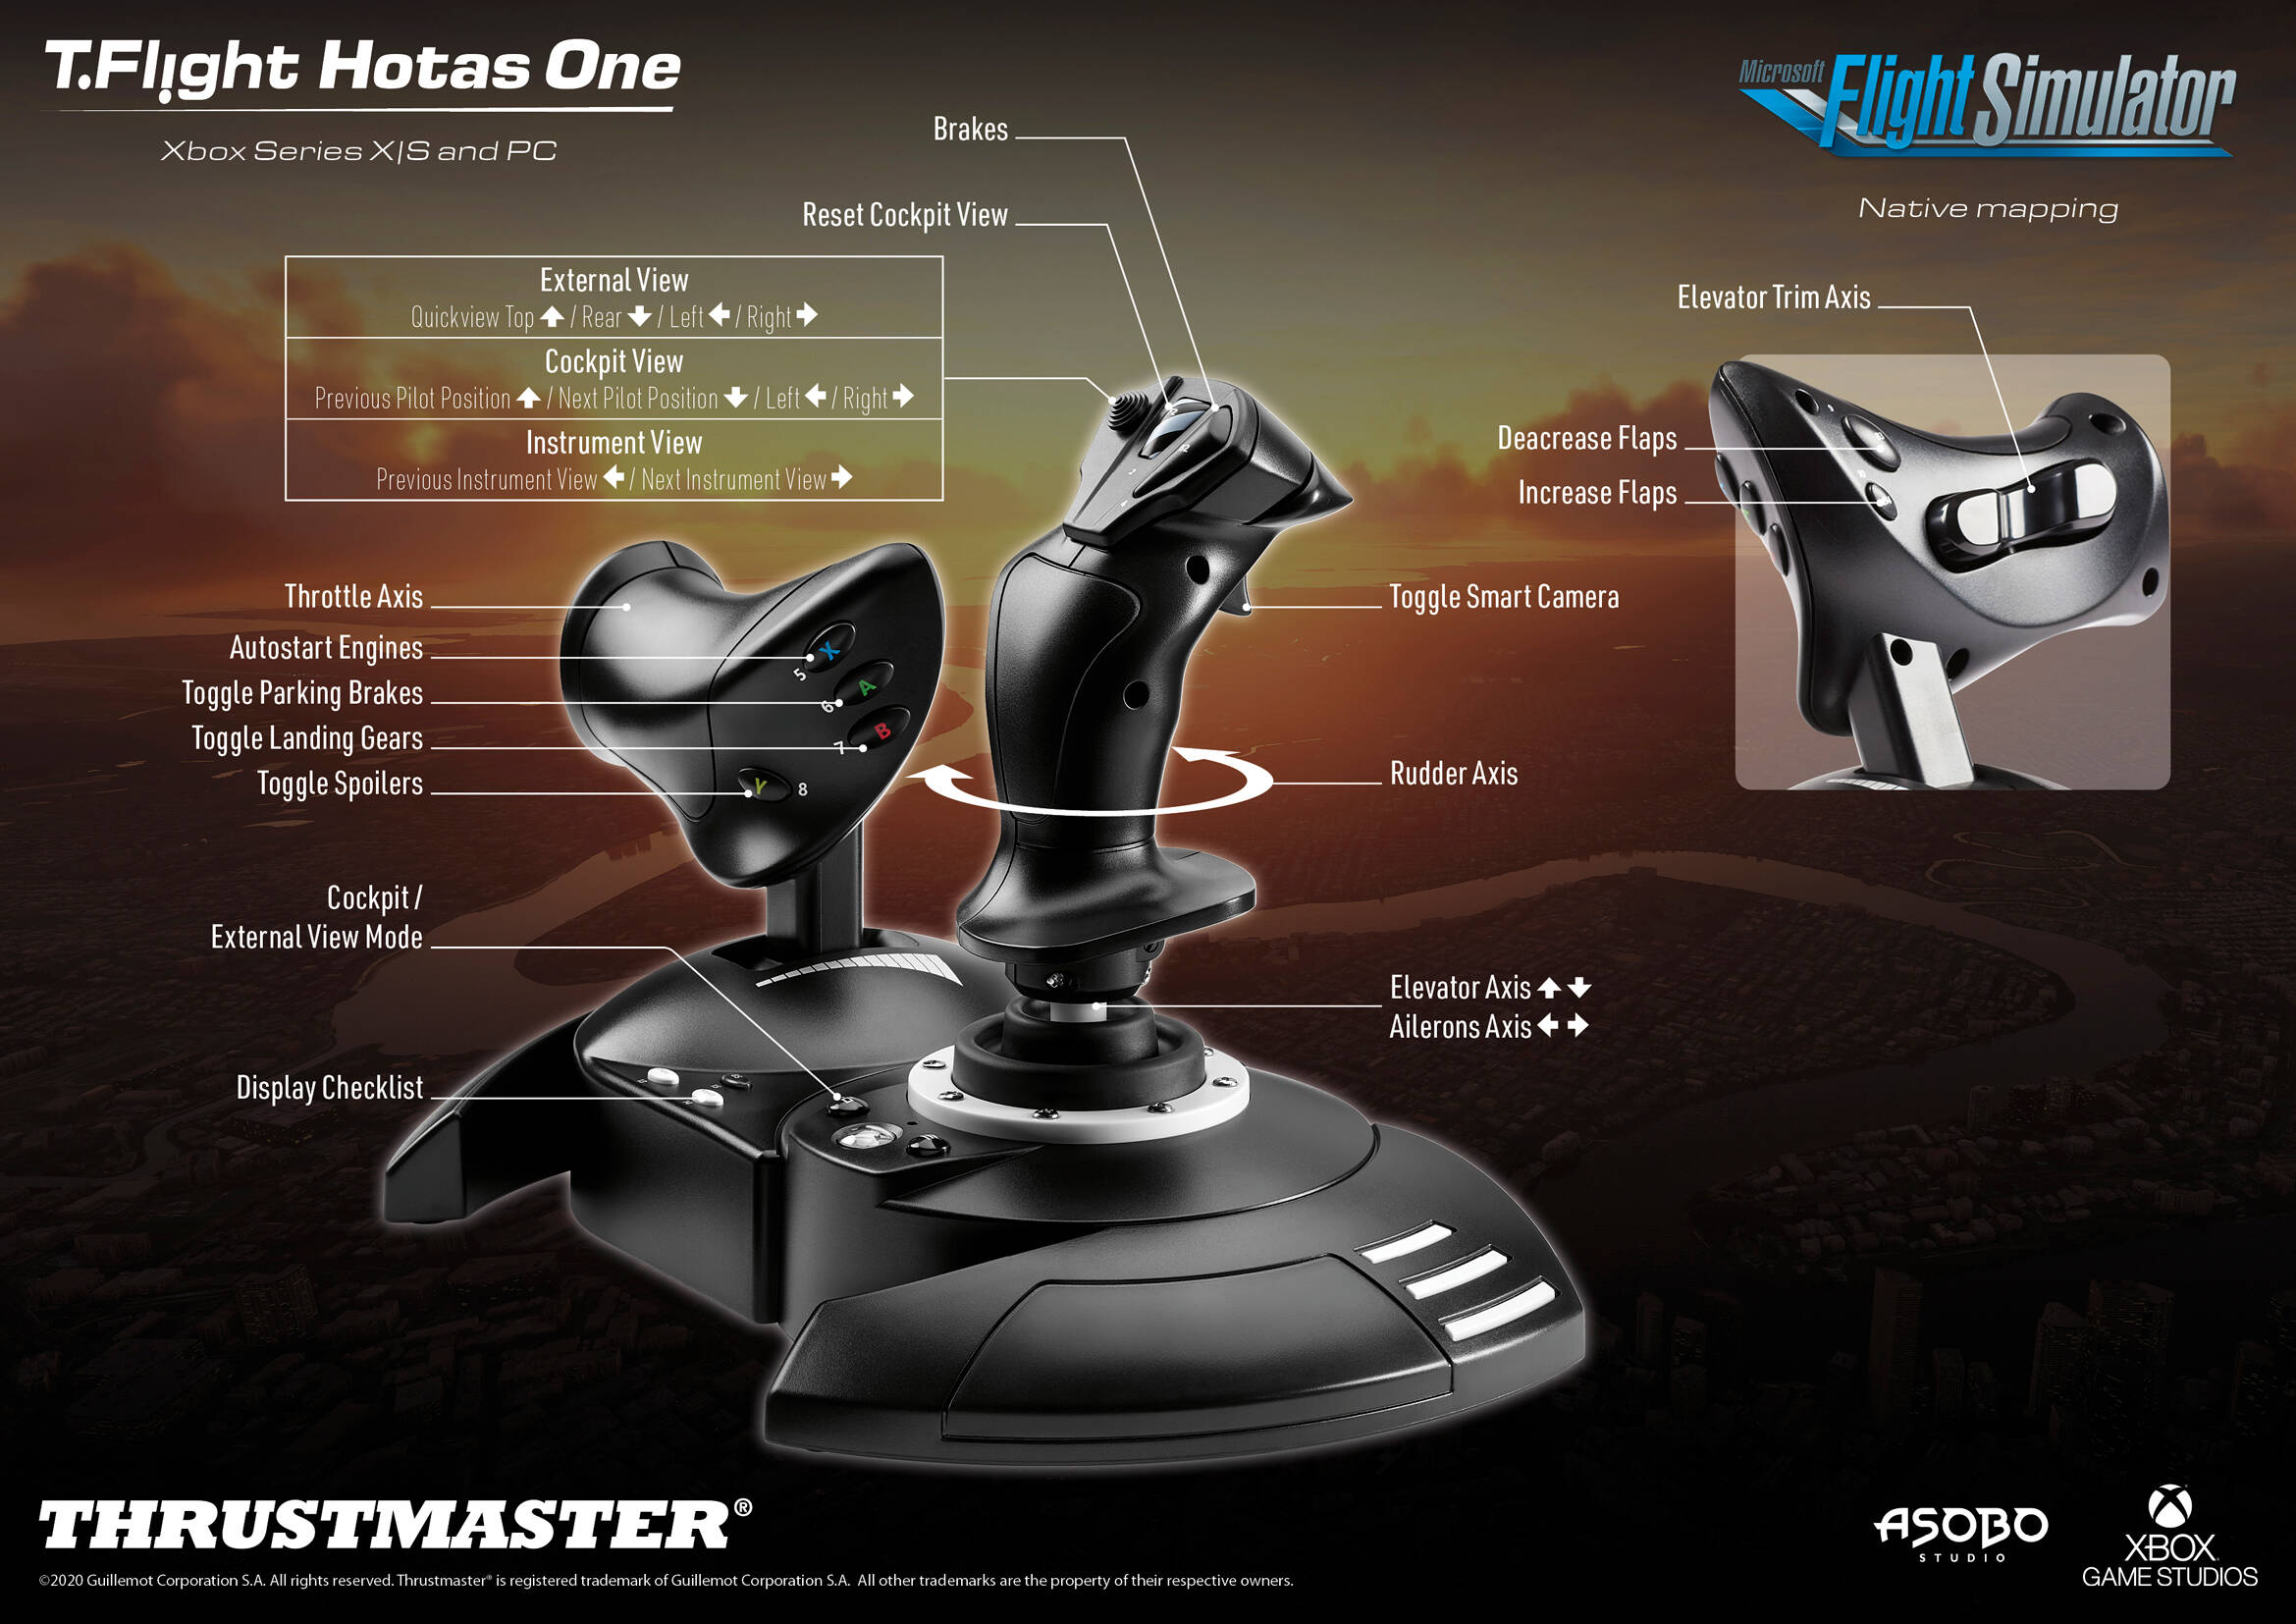 Thrustmaster HOTAS One not recognizing button presses - Hardware